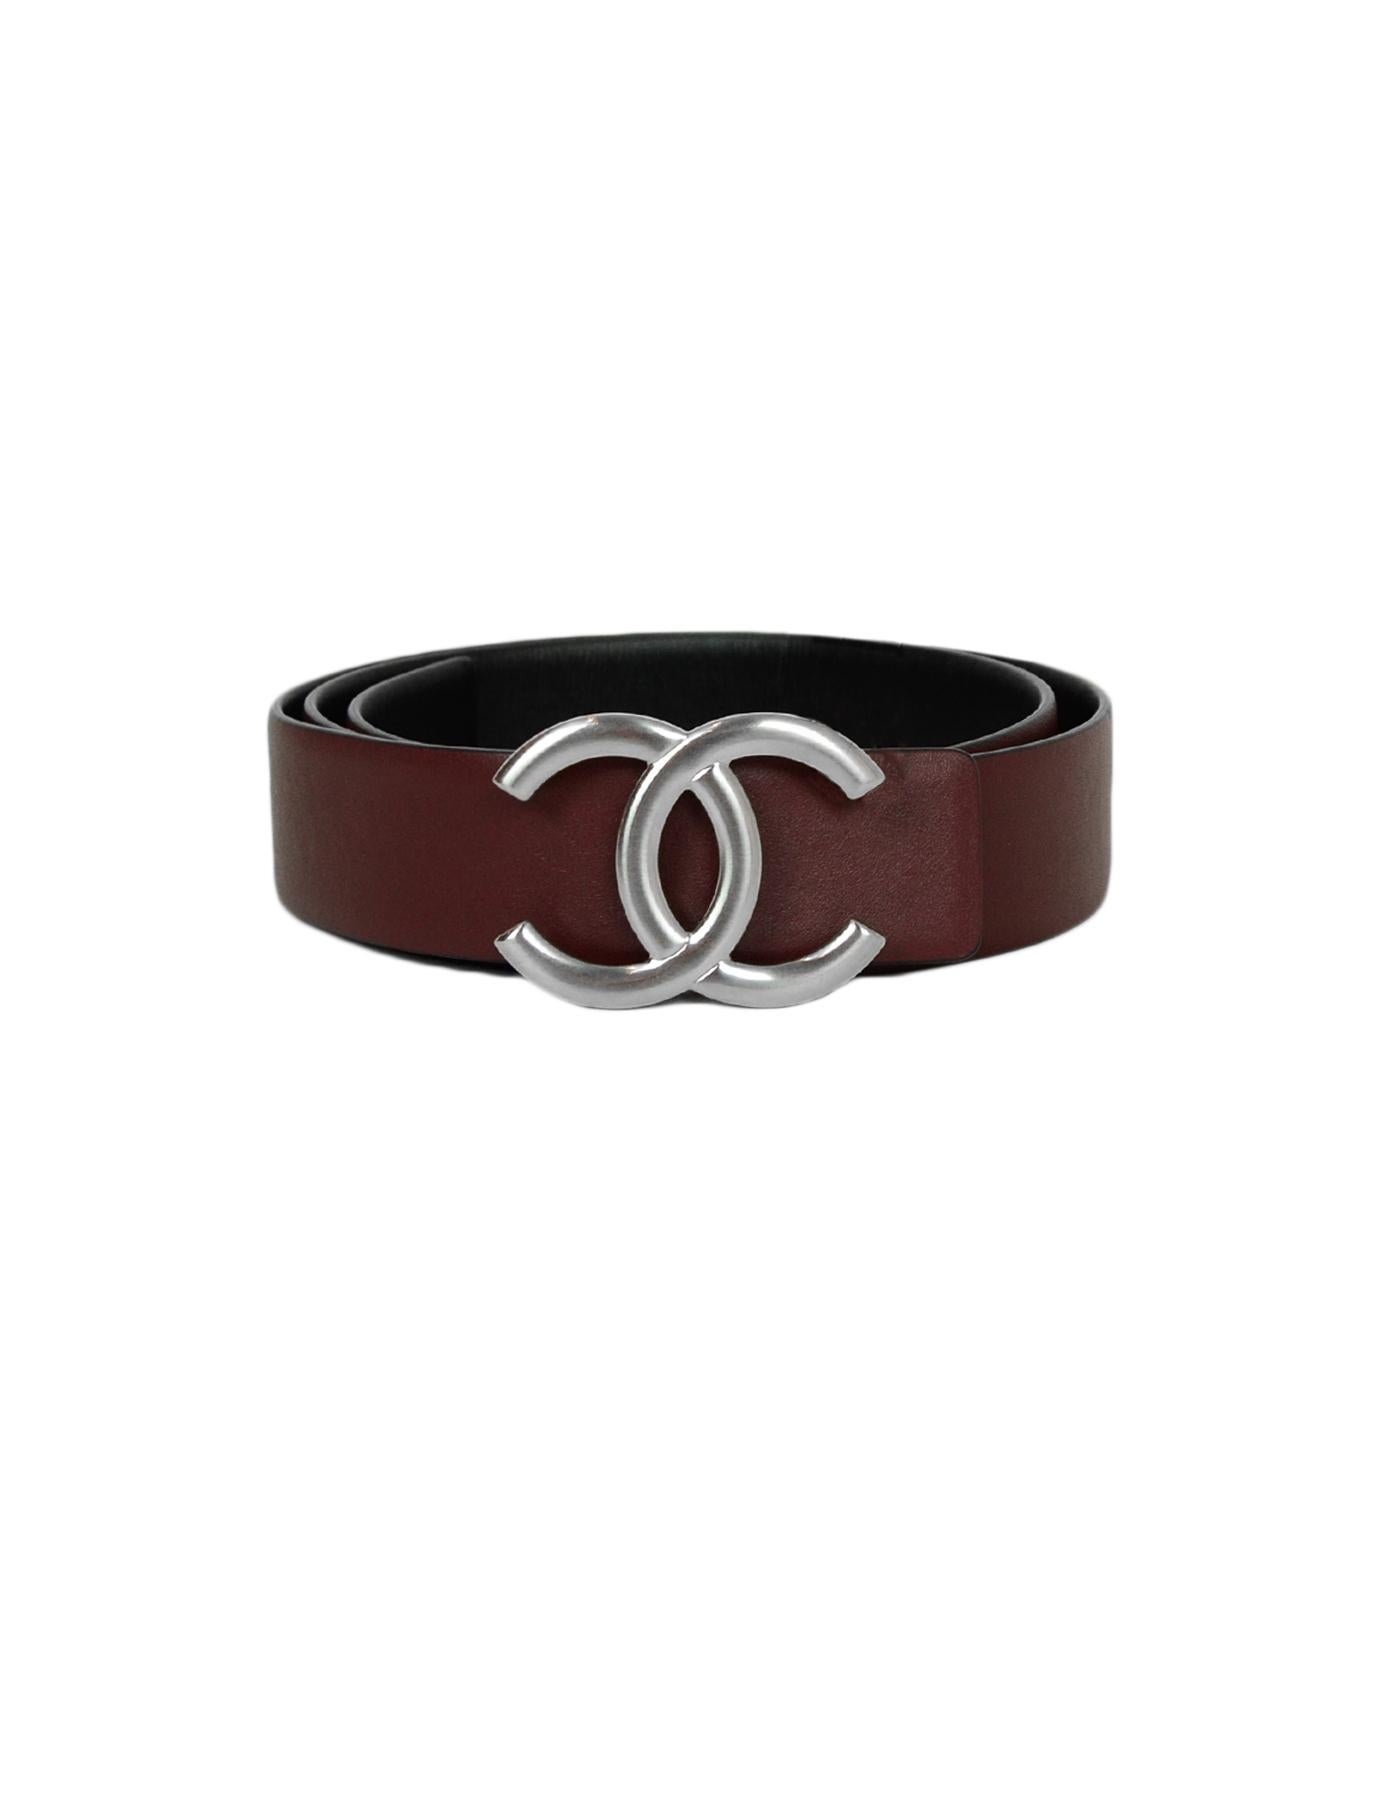 Chanel 2019 Black/Brown Reversible CC Belt sz 80

Made In: Italy
Year of Production: 2019
Color: Black, brown
Hardware: Brushed silvertone
Materials: Leather, metal
Closure/Opening: Peg hold closure
Overall Condition: Excellent pre-owned condition.